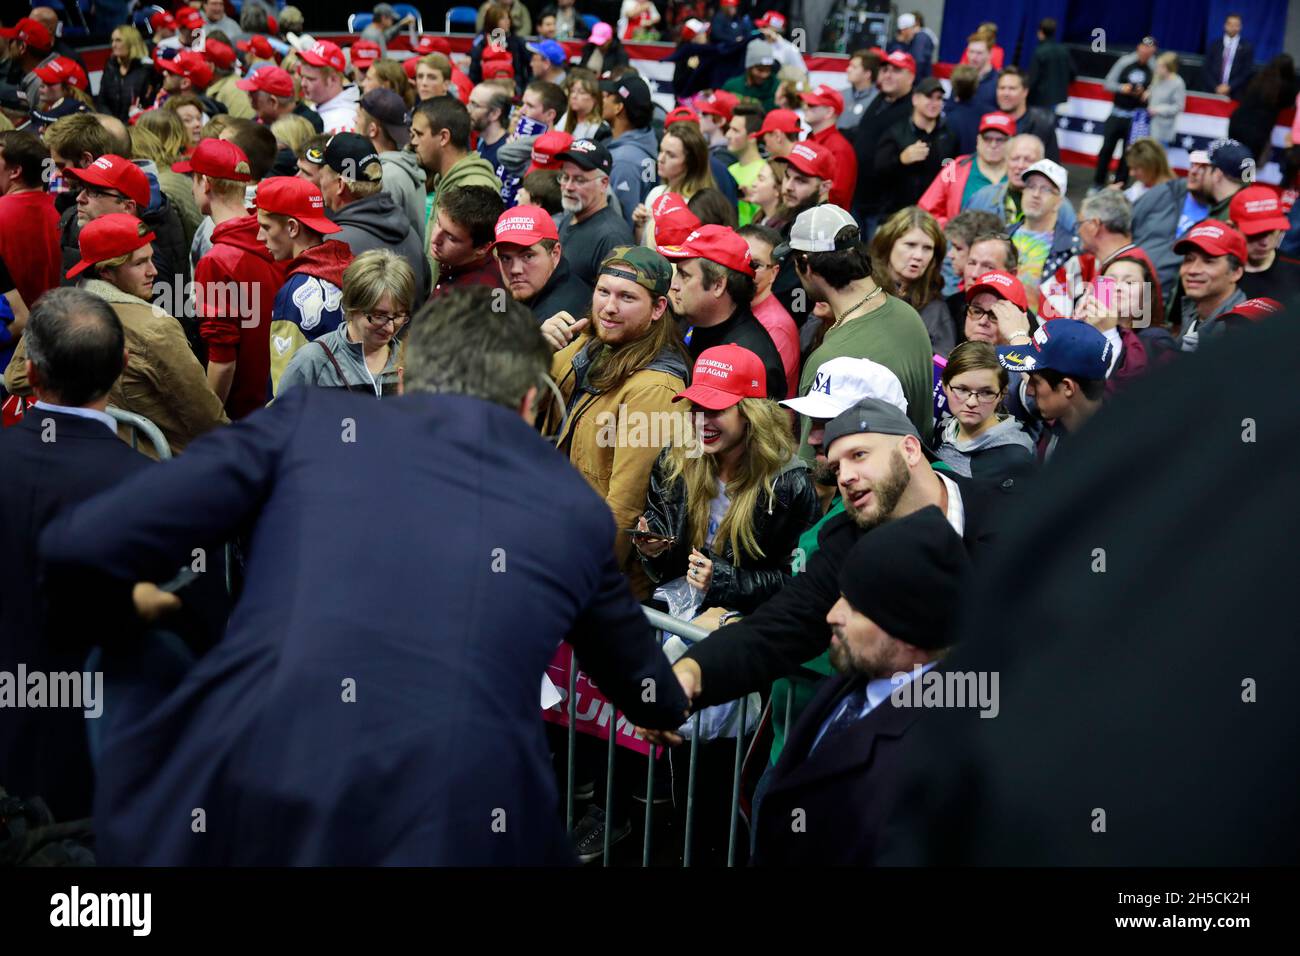 11052018 - Fort Wayne, Indiana, USA: Trump supporters interact with CNN reporter Jim Acosta, some asking for autographs, after United States President Donald J. Trump who is campaigned for Indiana congressional candidates during a Make America Great Again! rally at the Allen County War Memorial Coliseum in Fort Wayne, Indiana. Stock Photo